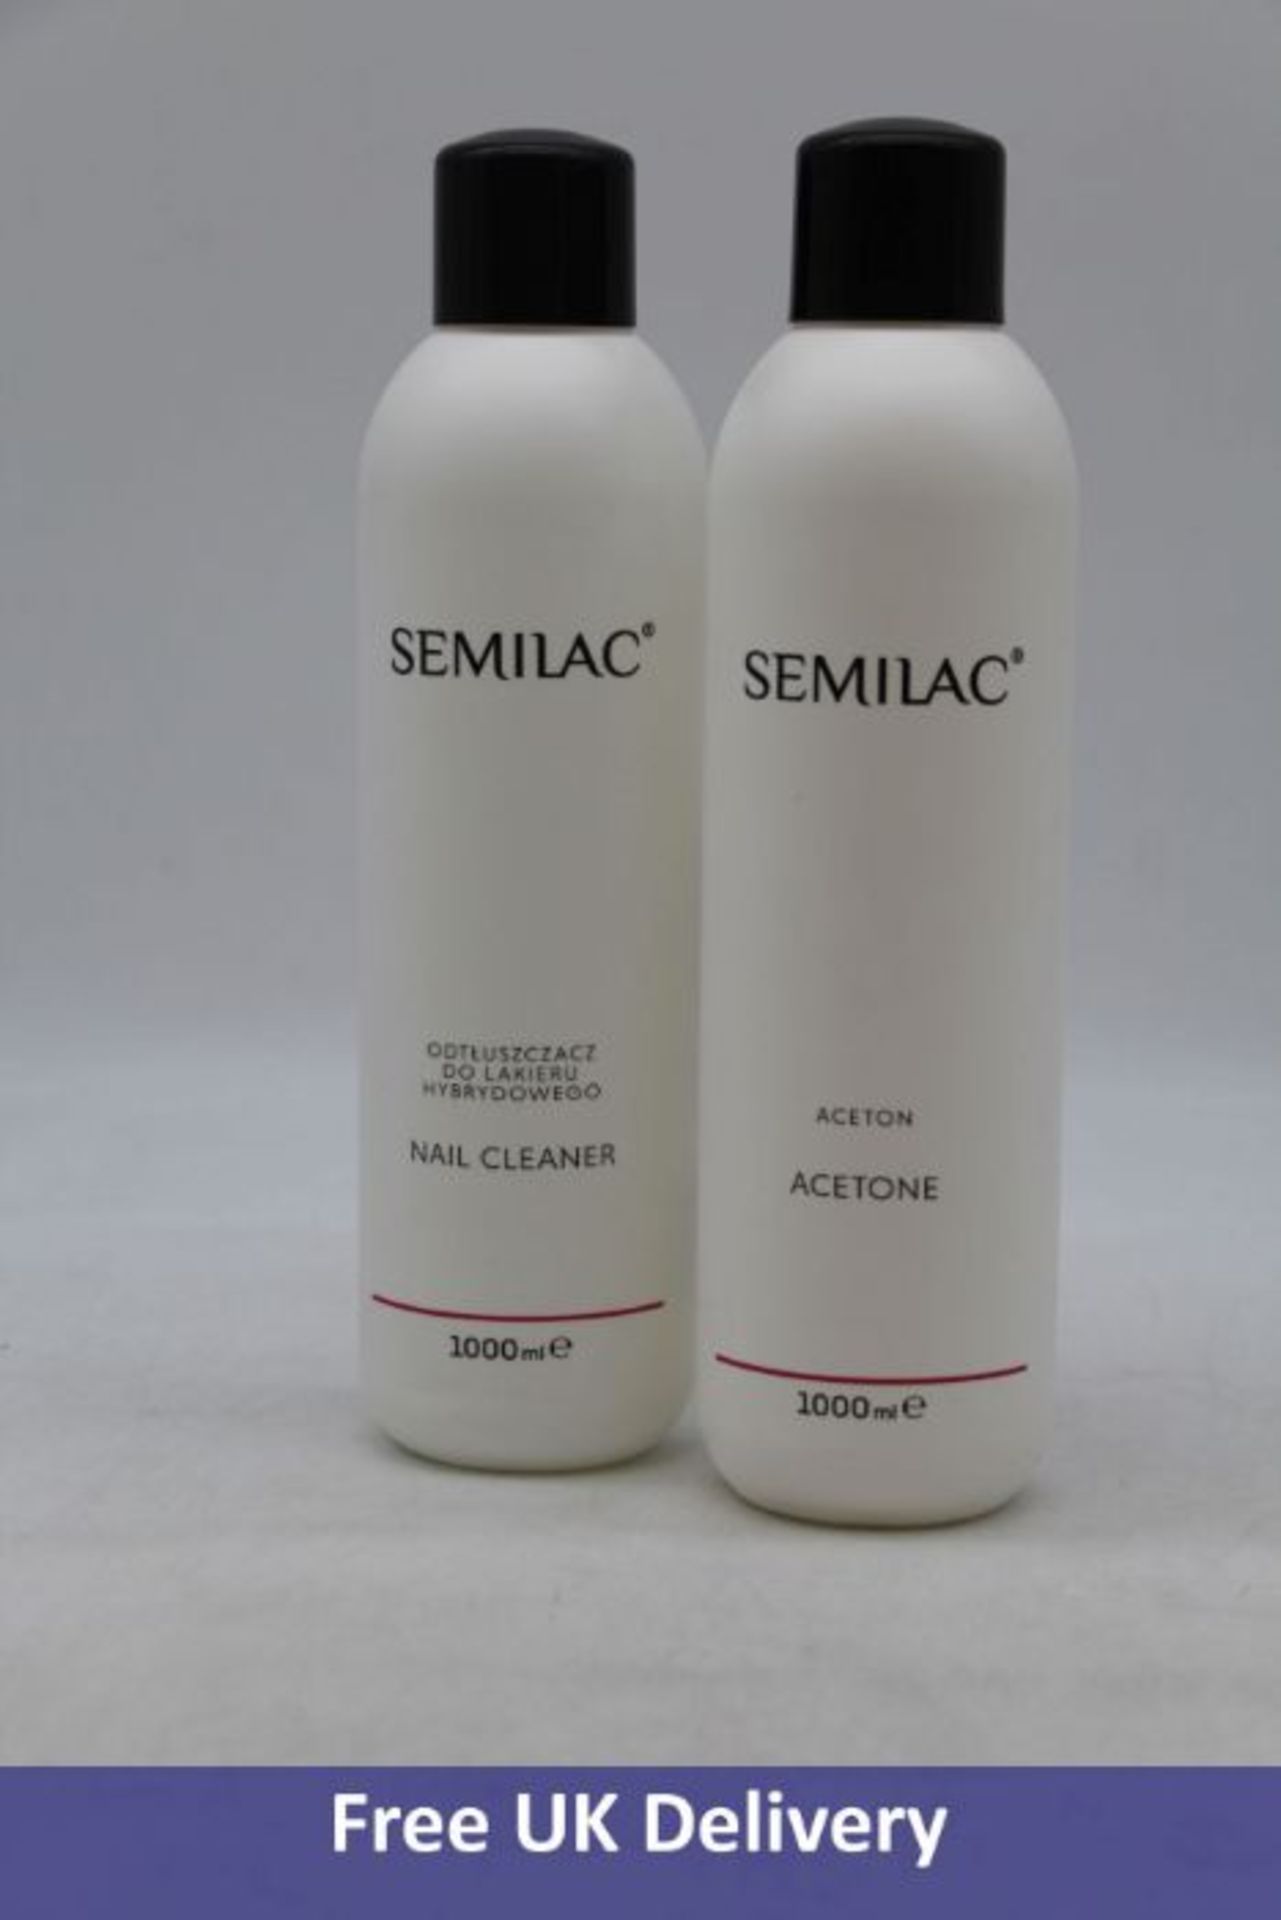 Two Semilac Nail Products, 1x Nail Cleaner for Degreasing Nails For Manicures and Applying Polish an